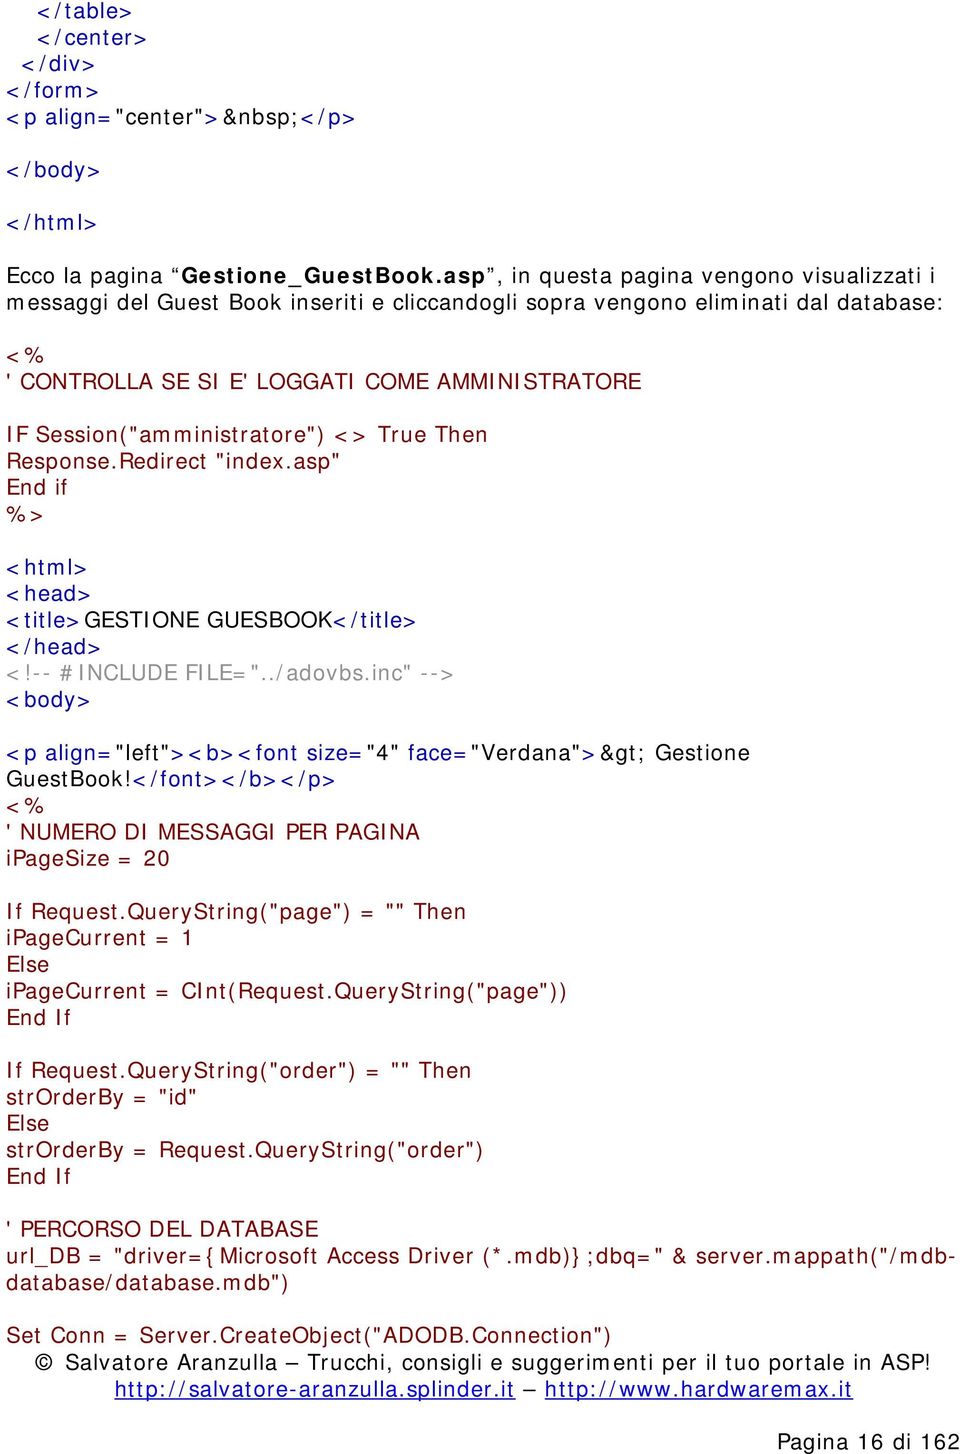 Session("amministratore") <> True Then Response.Redirect "index.asp" End if <html> < head> <title>gestione GUESBOOK</title> </head> <!-- #INCLUDE FILE="../adovbs.